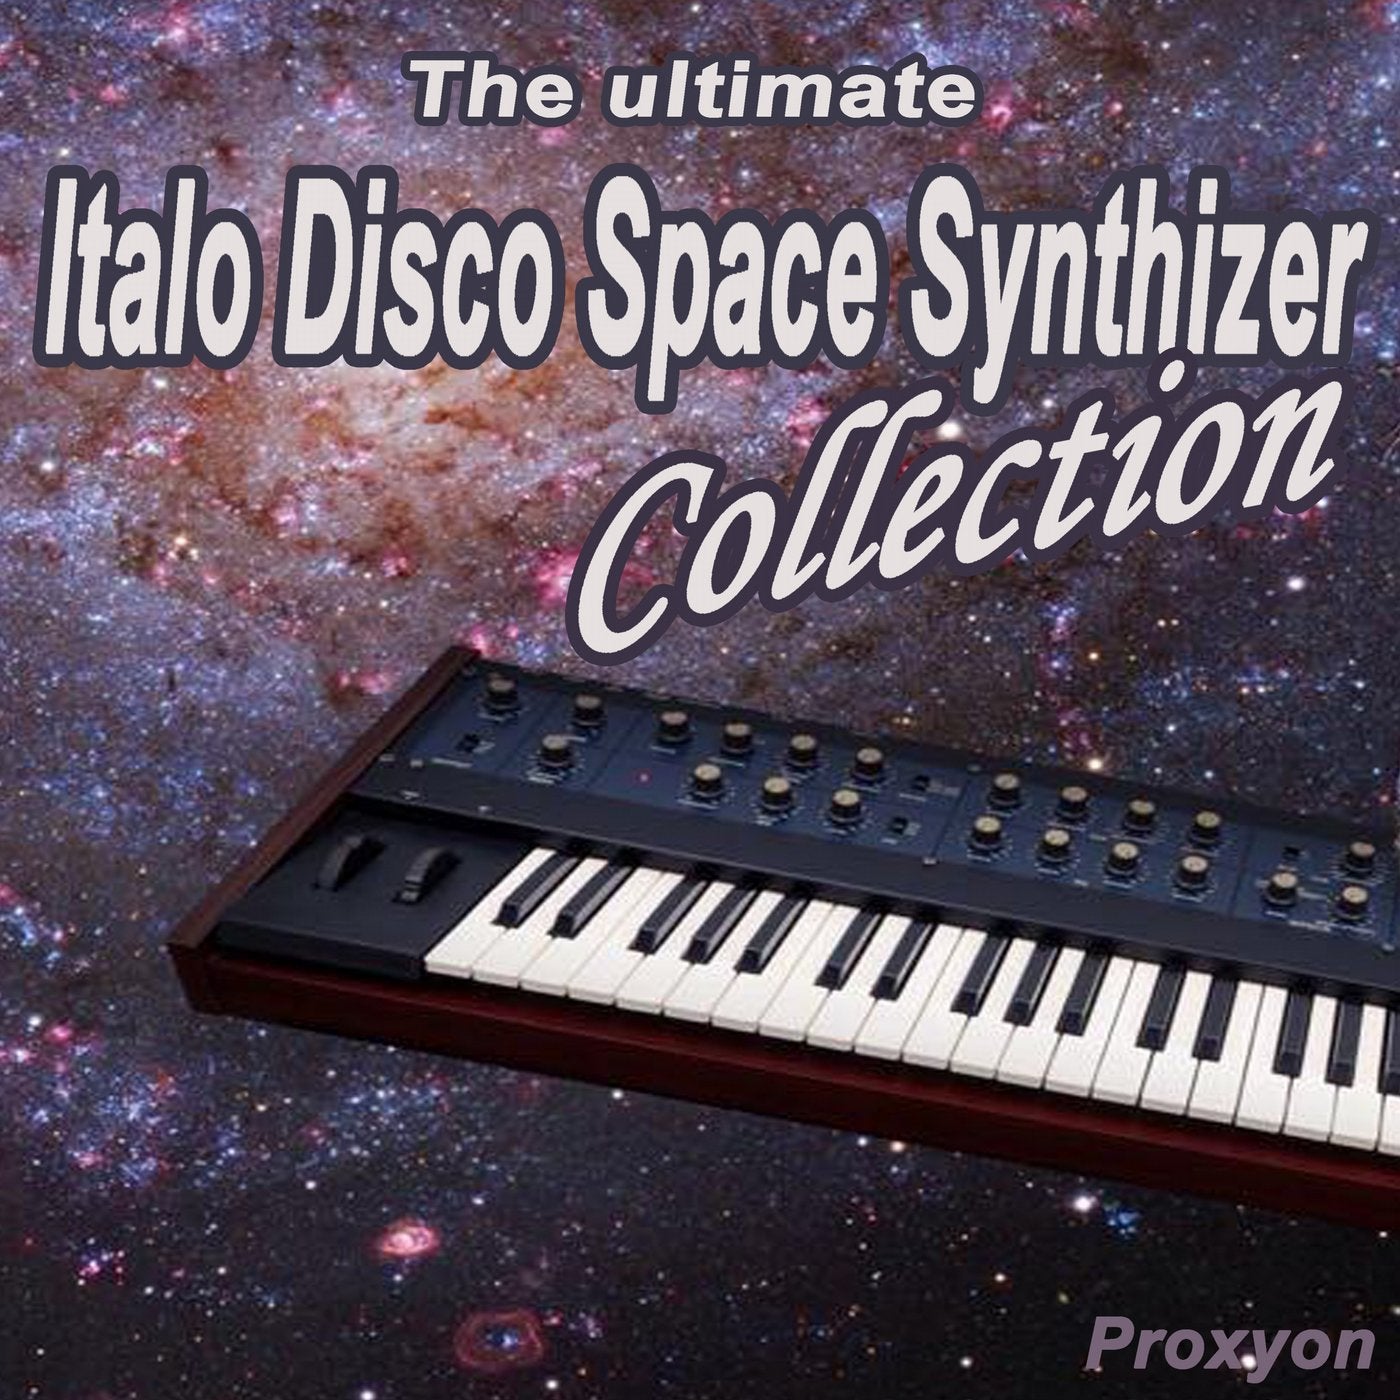 The Ultimate Italo Disco Space Synthizer Collection